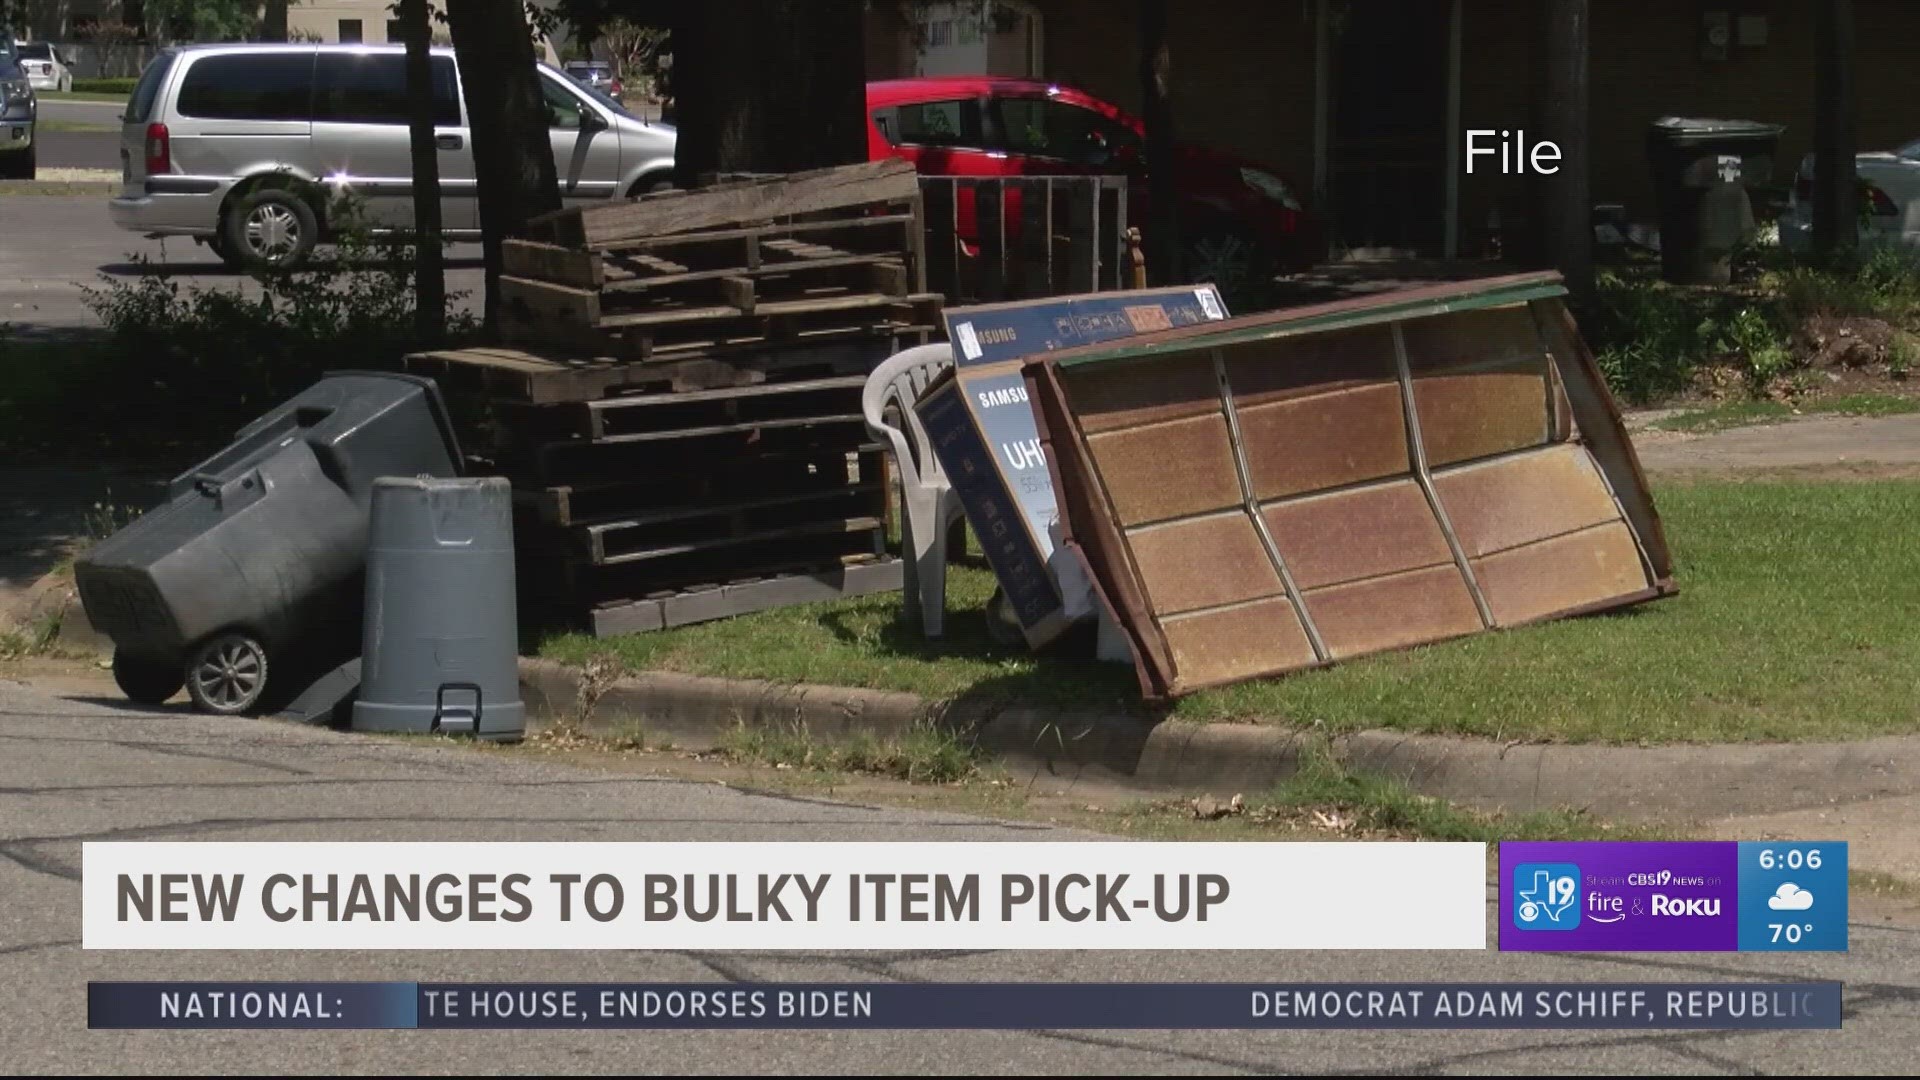 The department announced they are doing away with the two free bulky item collection weeks each year. Customers will now use an online form to request collection.